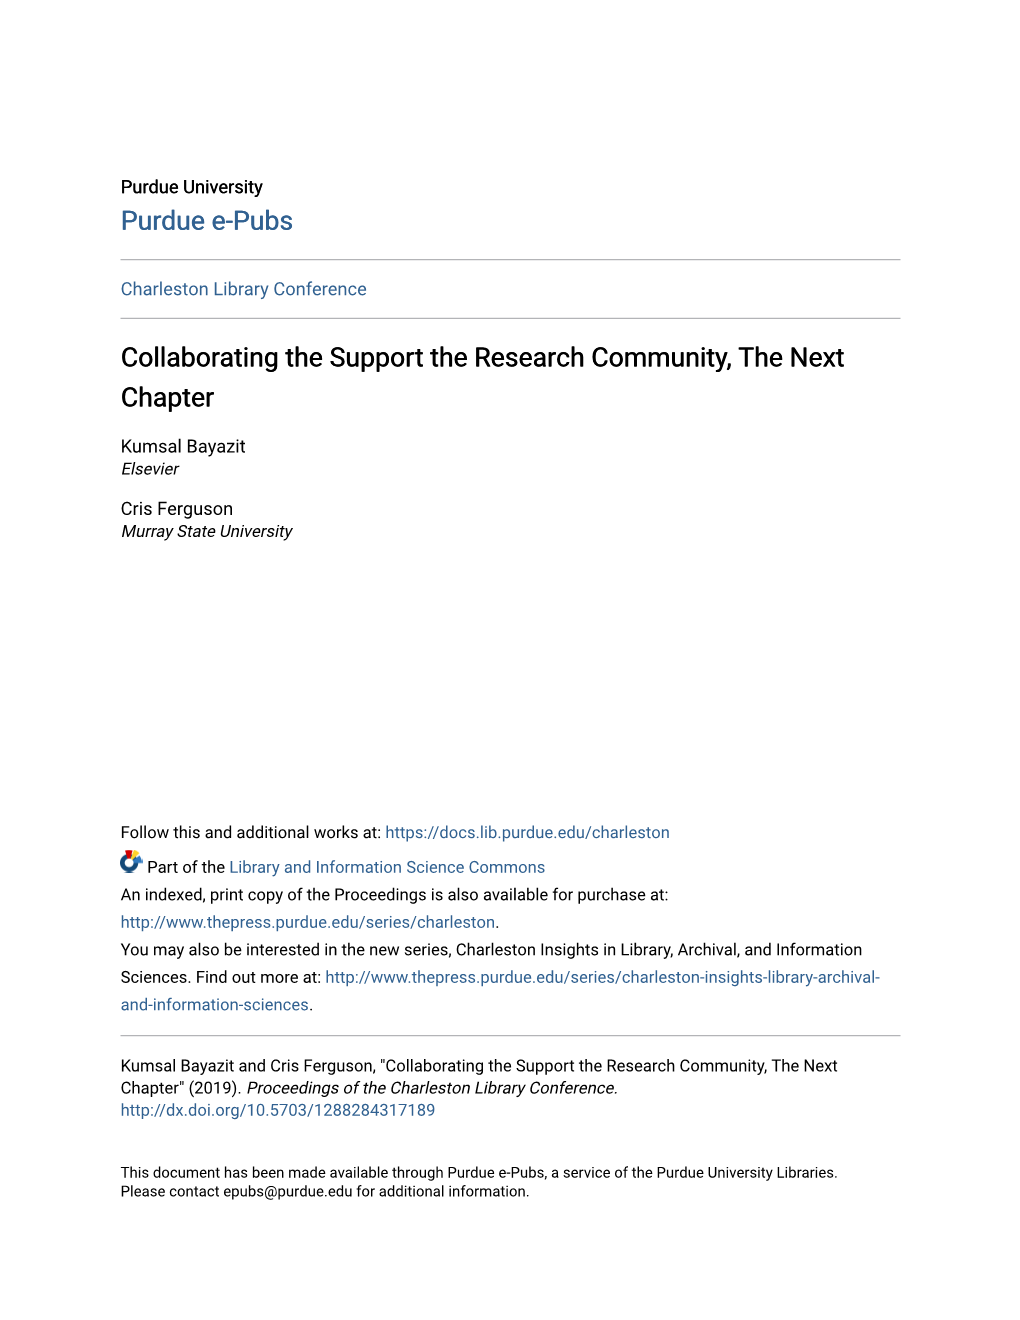 Collaborating the Support the Research Community, the Next Chapter